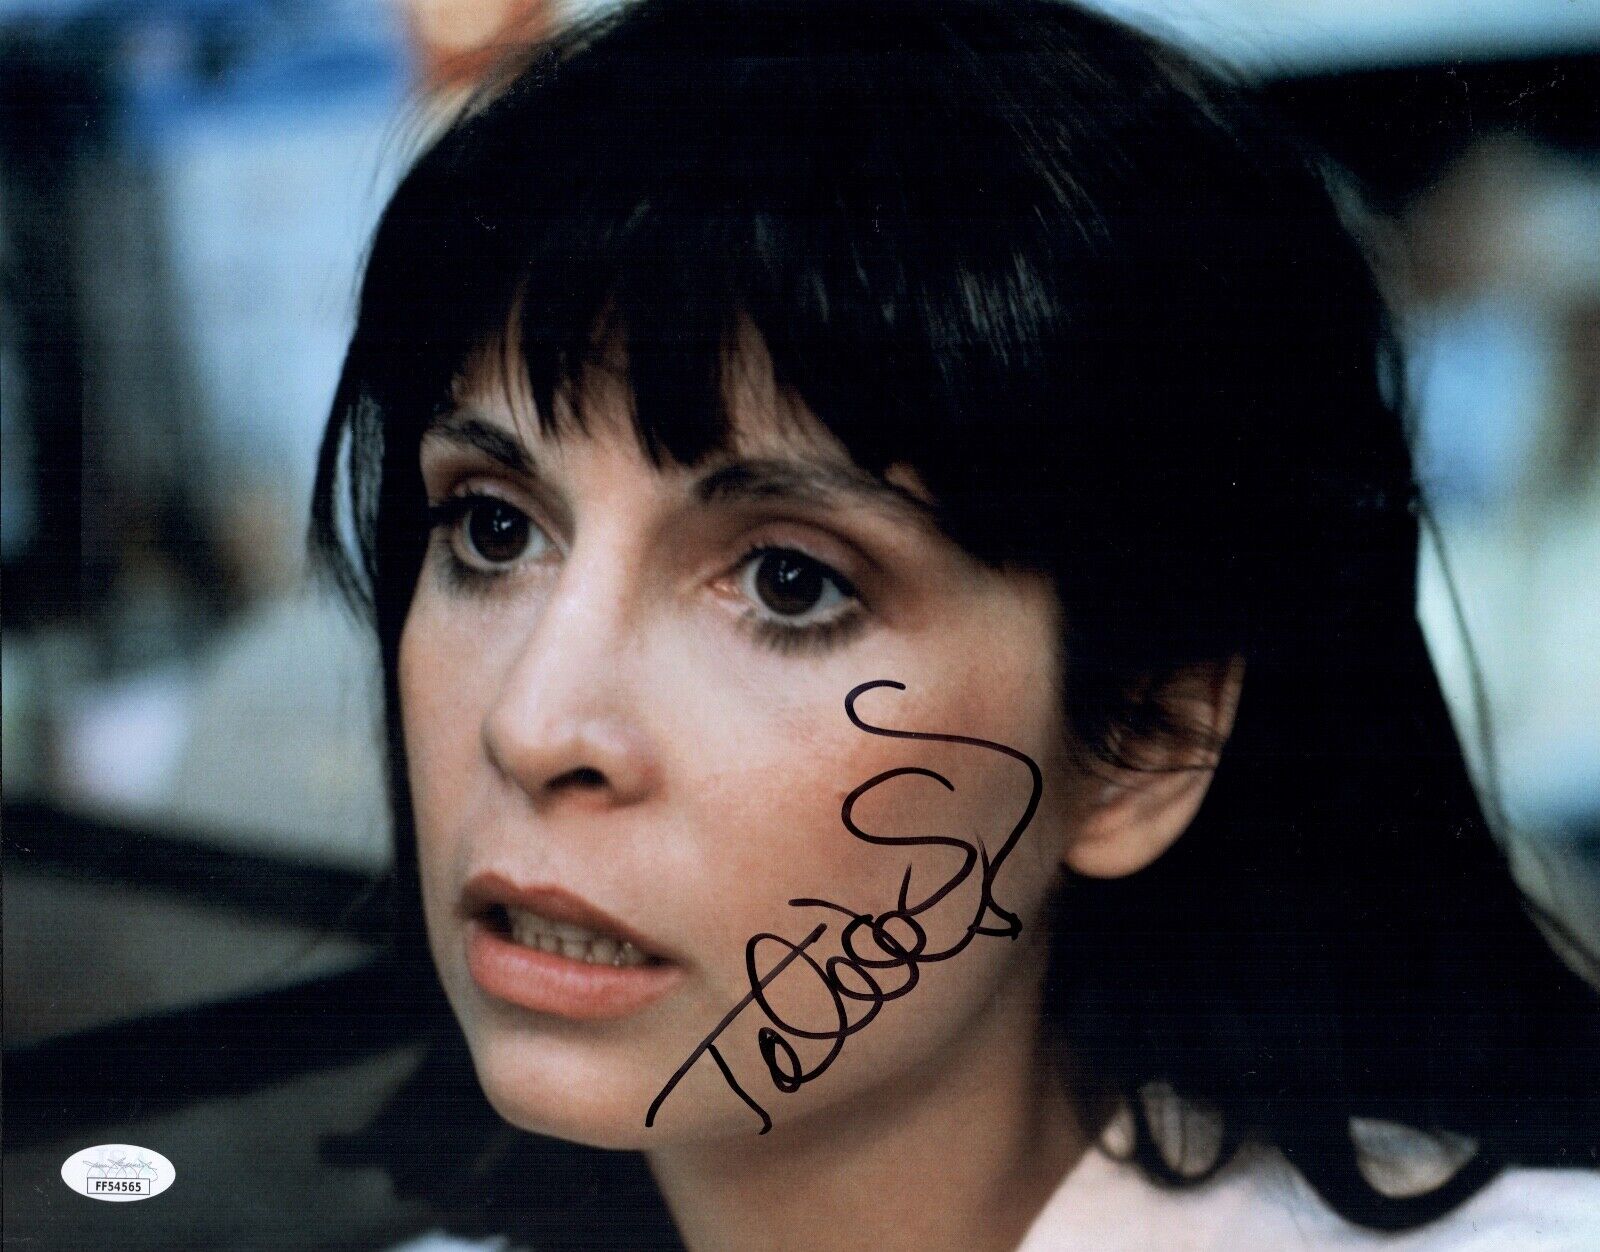 TALIA SHIRE Signed 11x14 Photo Poster painting ROCKY Autograph THE GODFATHER In Person JSA COA